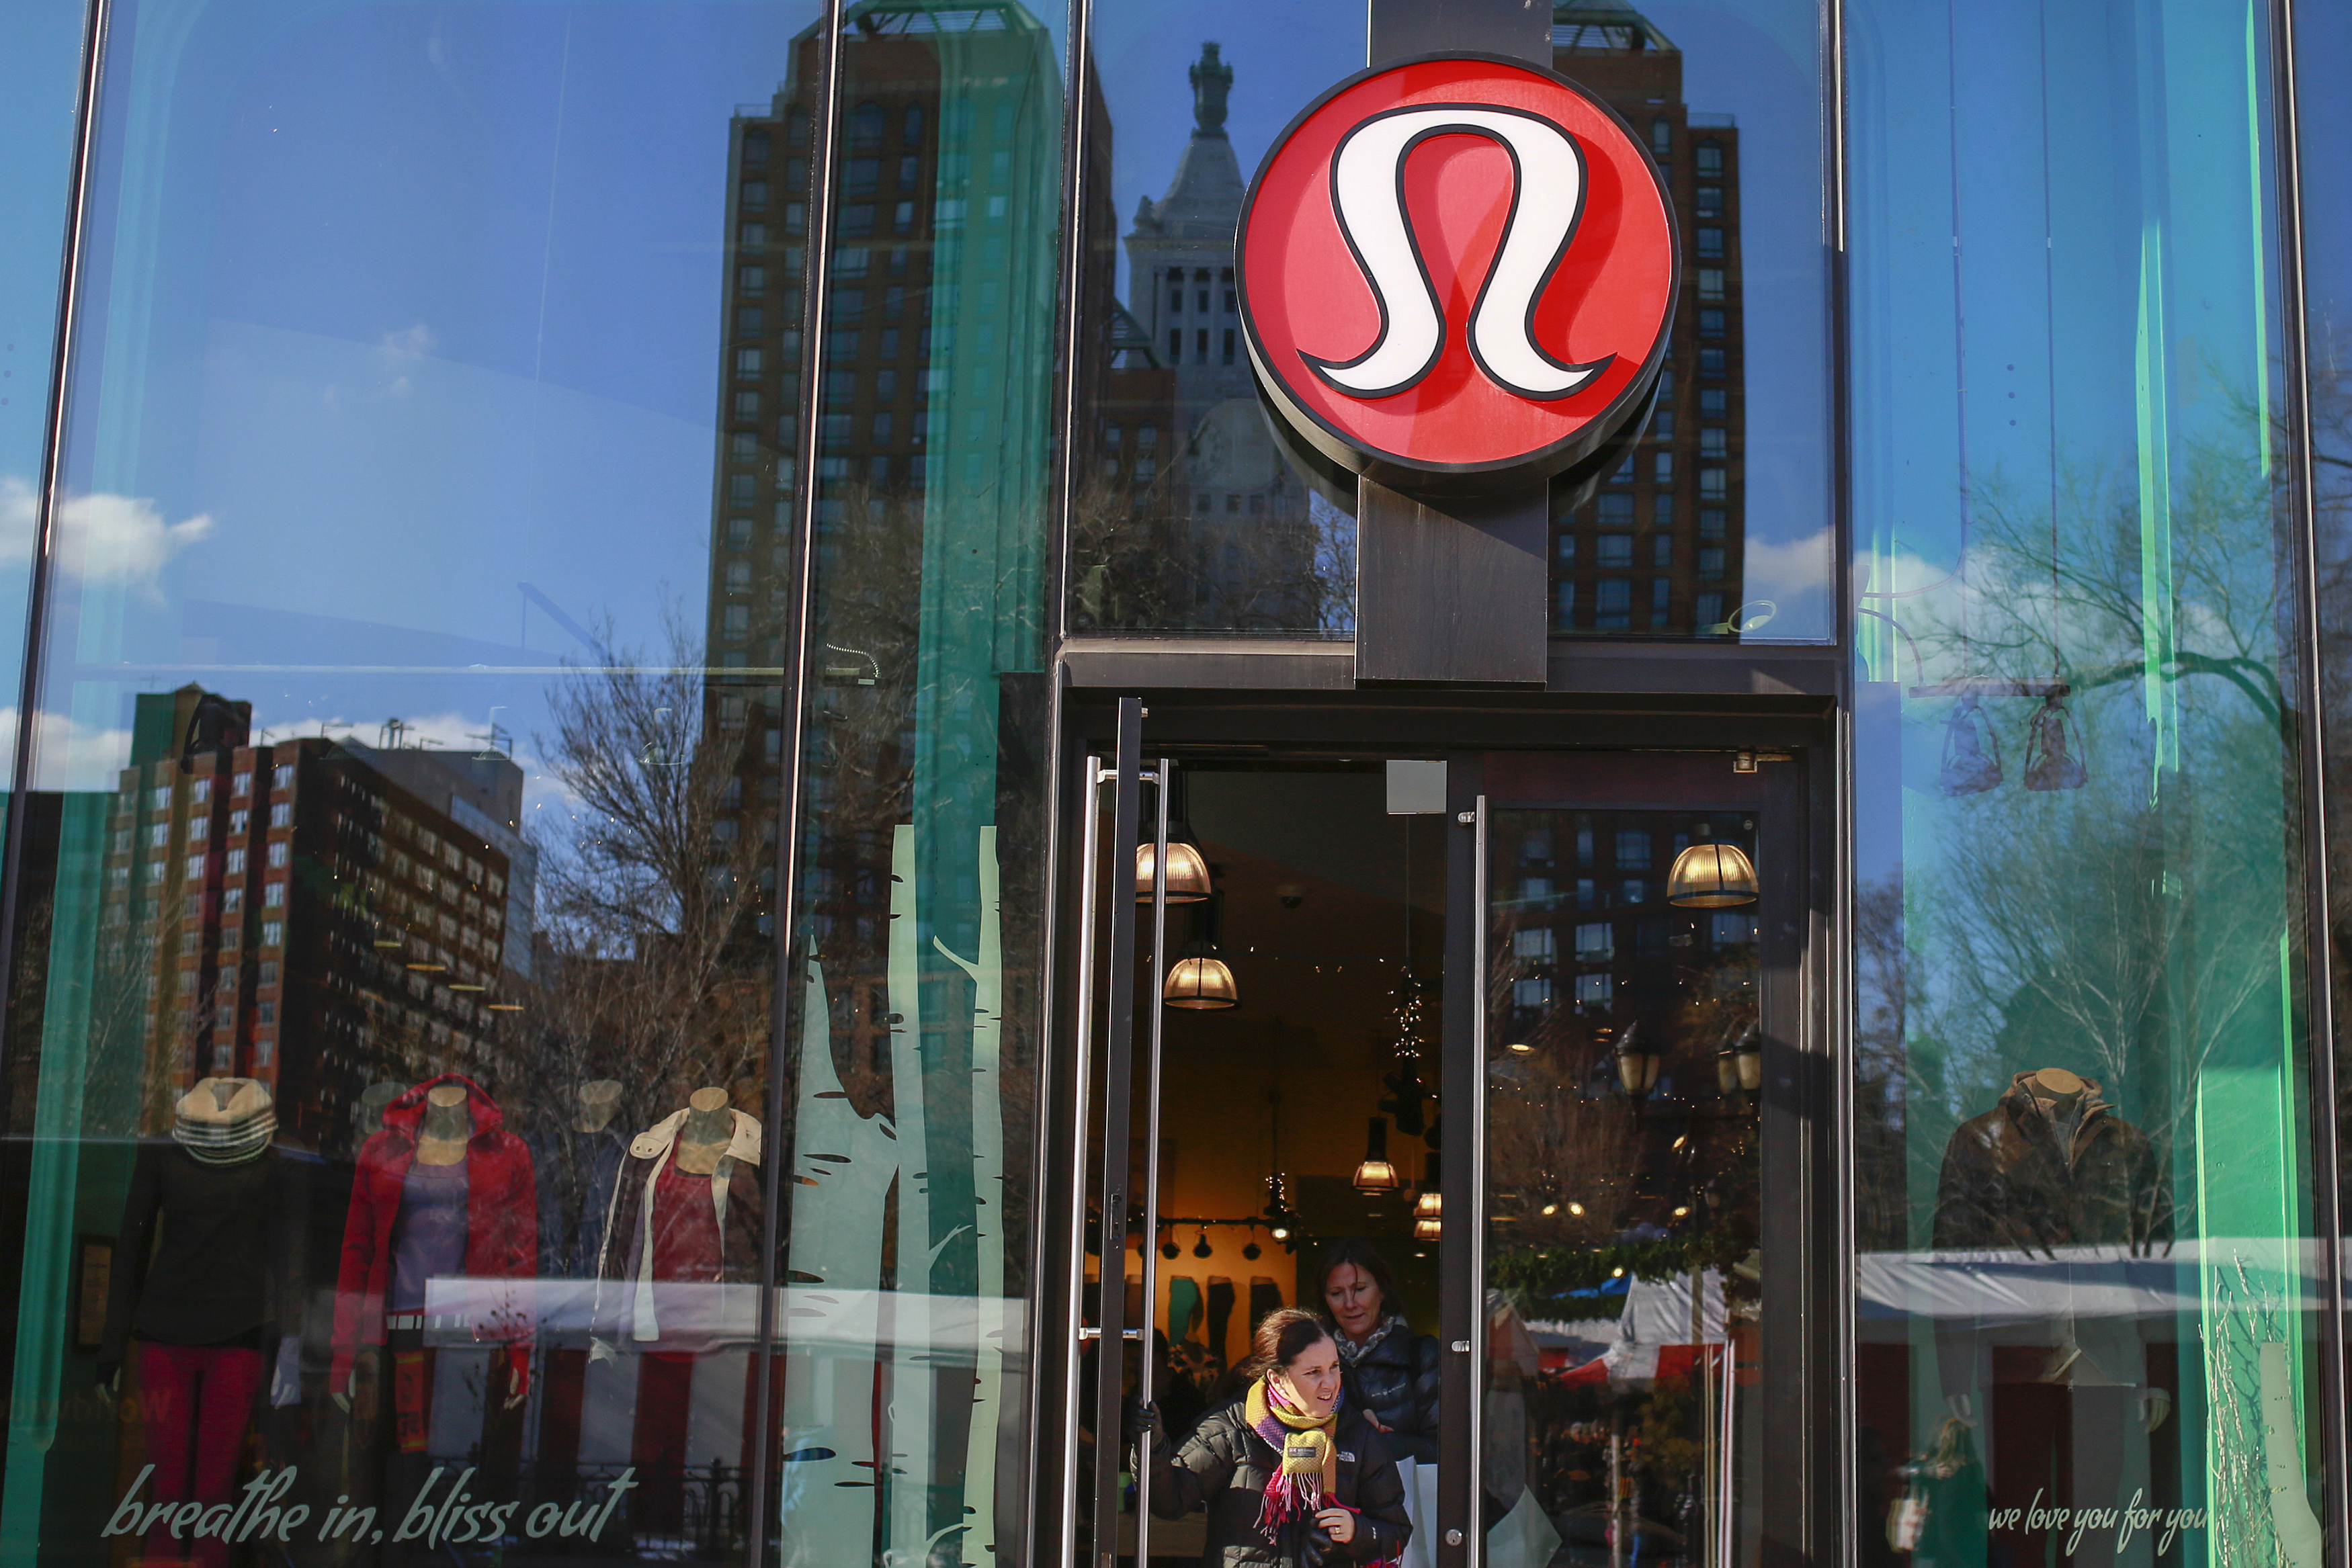 Grand Opening of Vancouver Lululemon New Flagship Store Burrard at